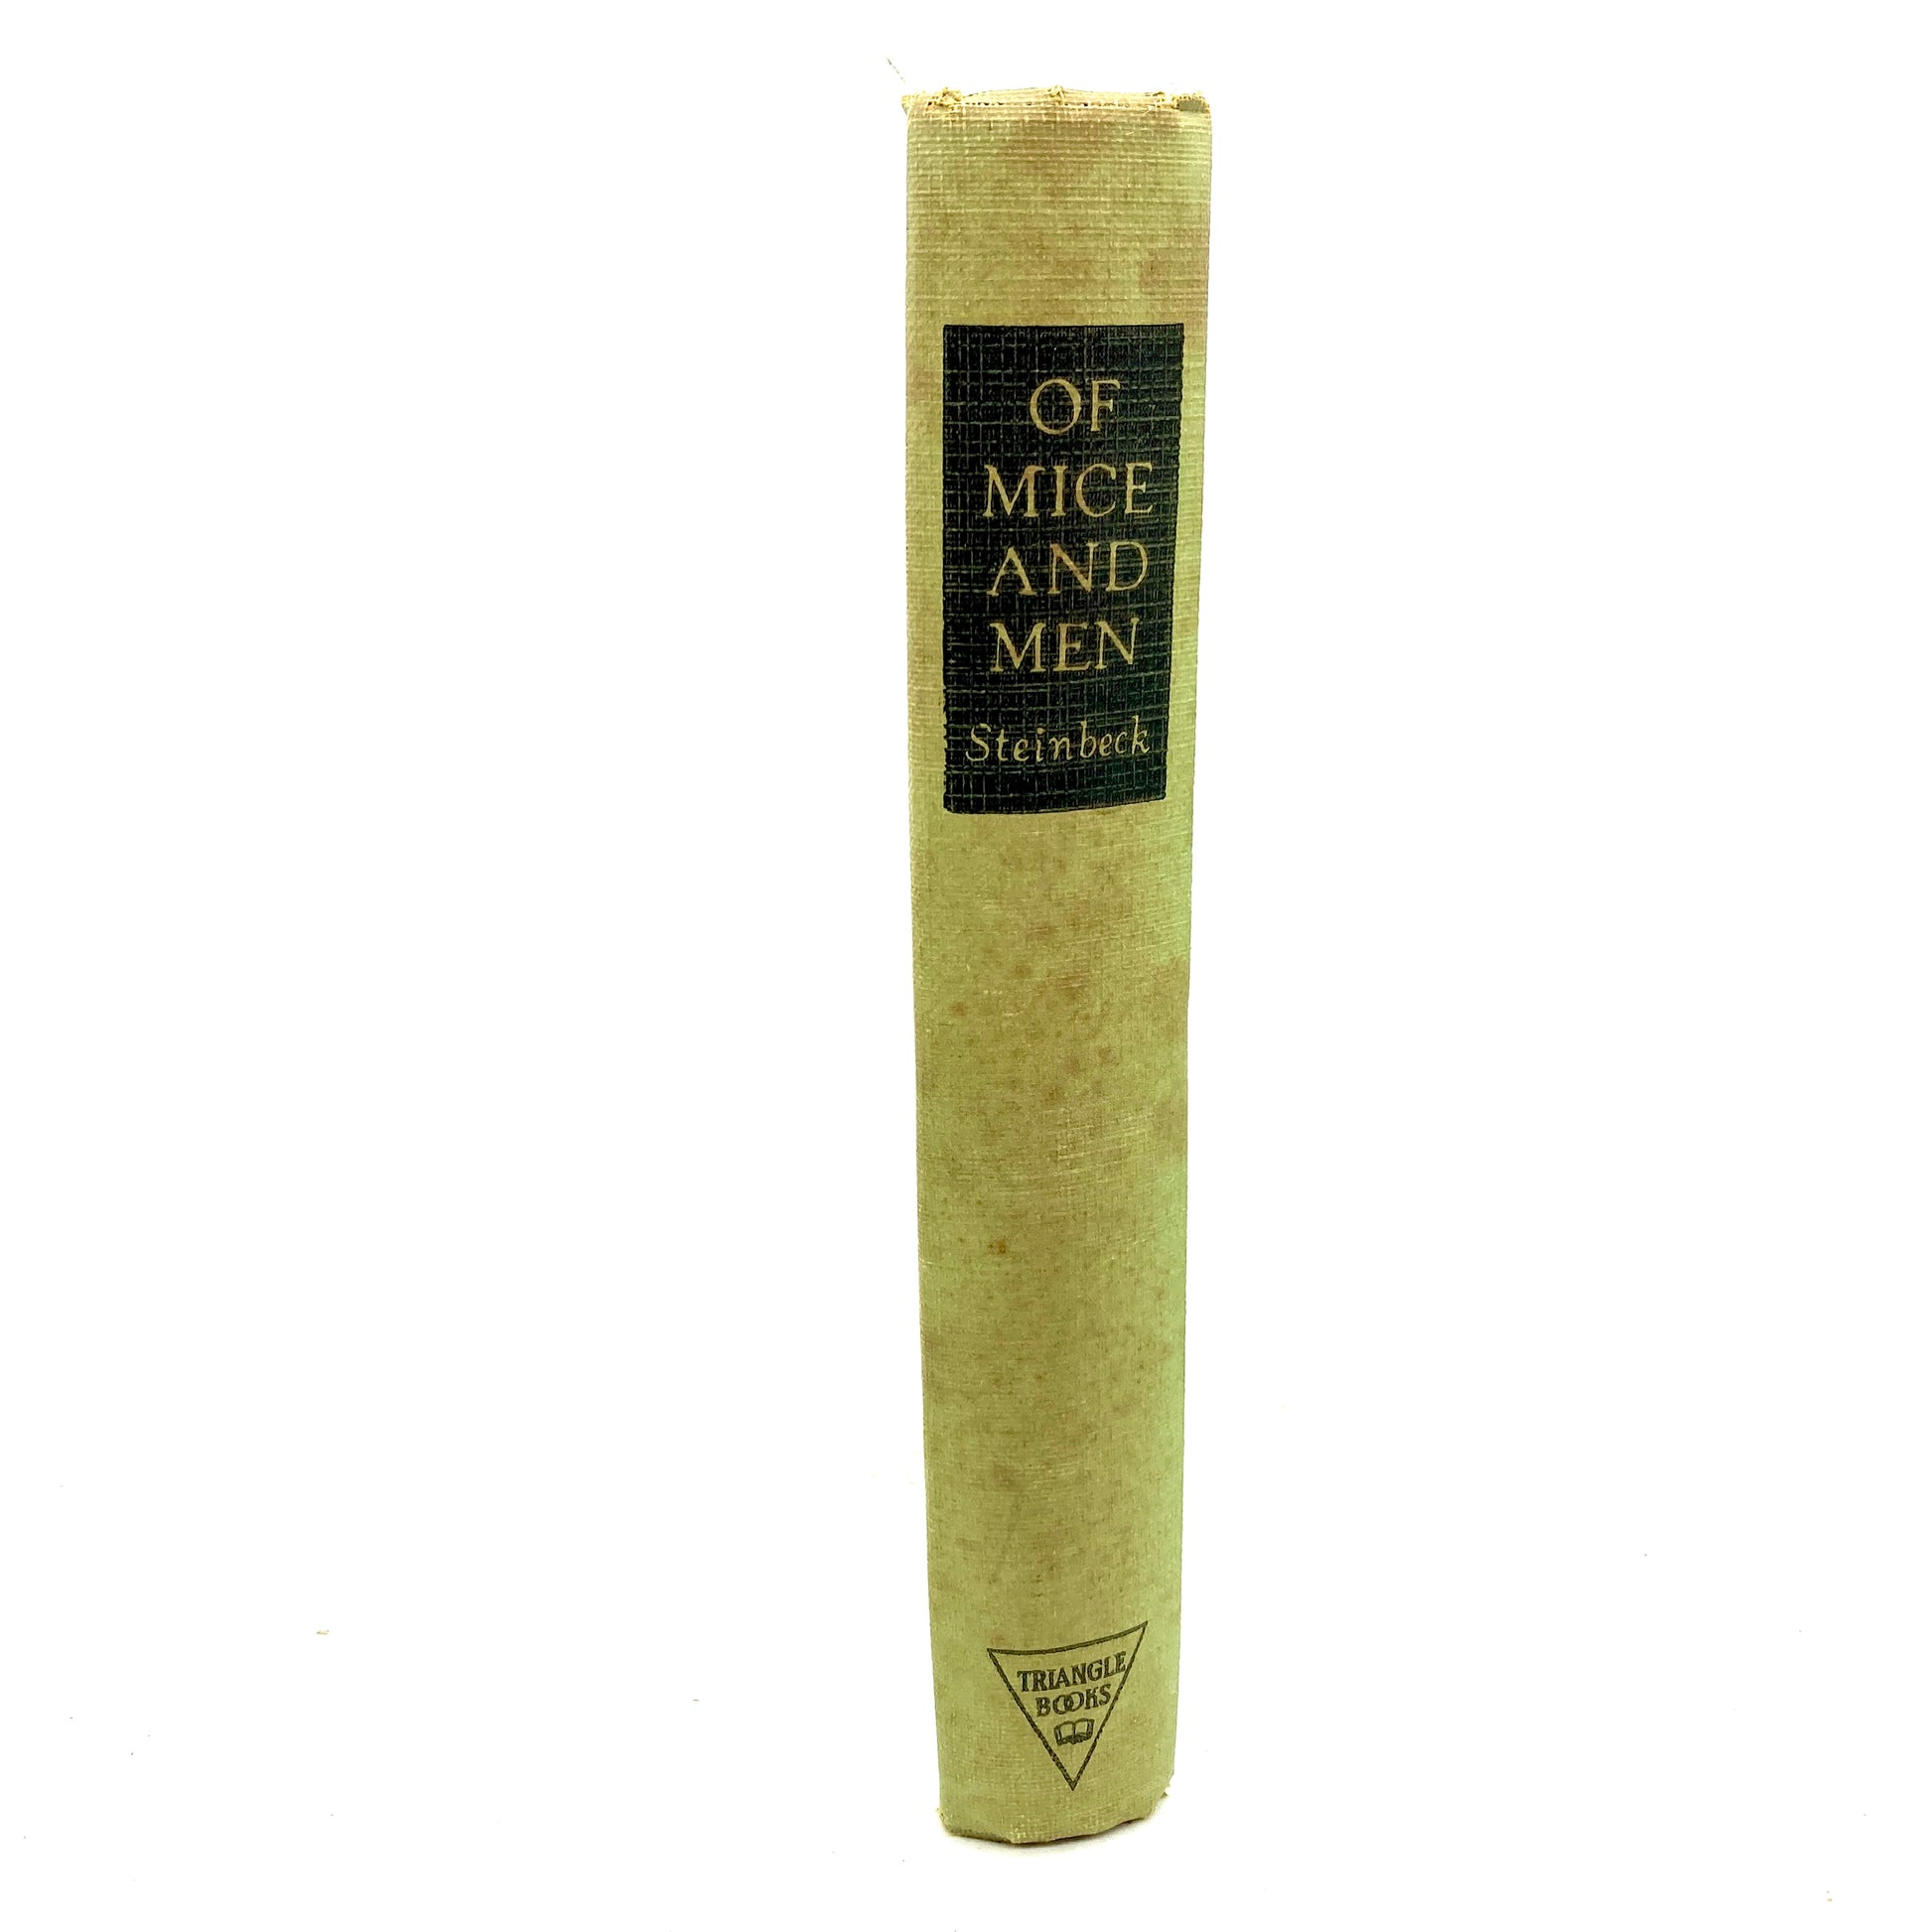 STEINBECK, John "Of Mice and Men" [Triangle Books, 1938] - Buzz Bookstore